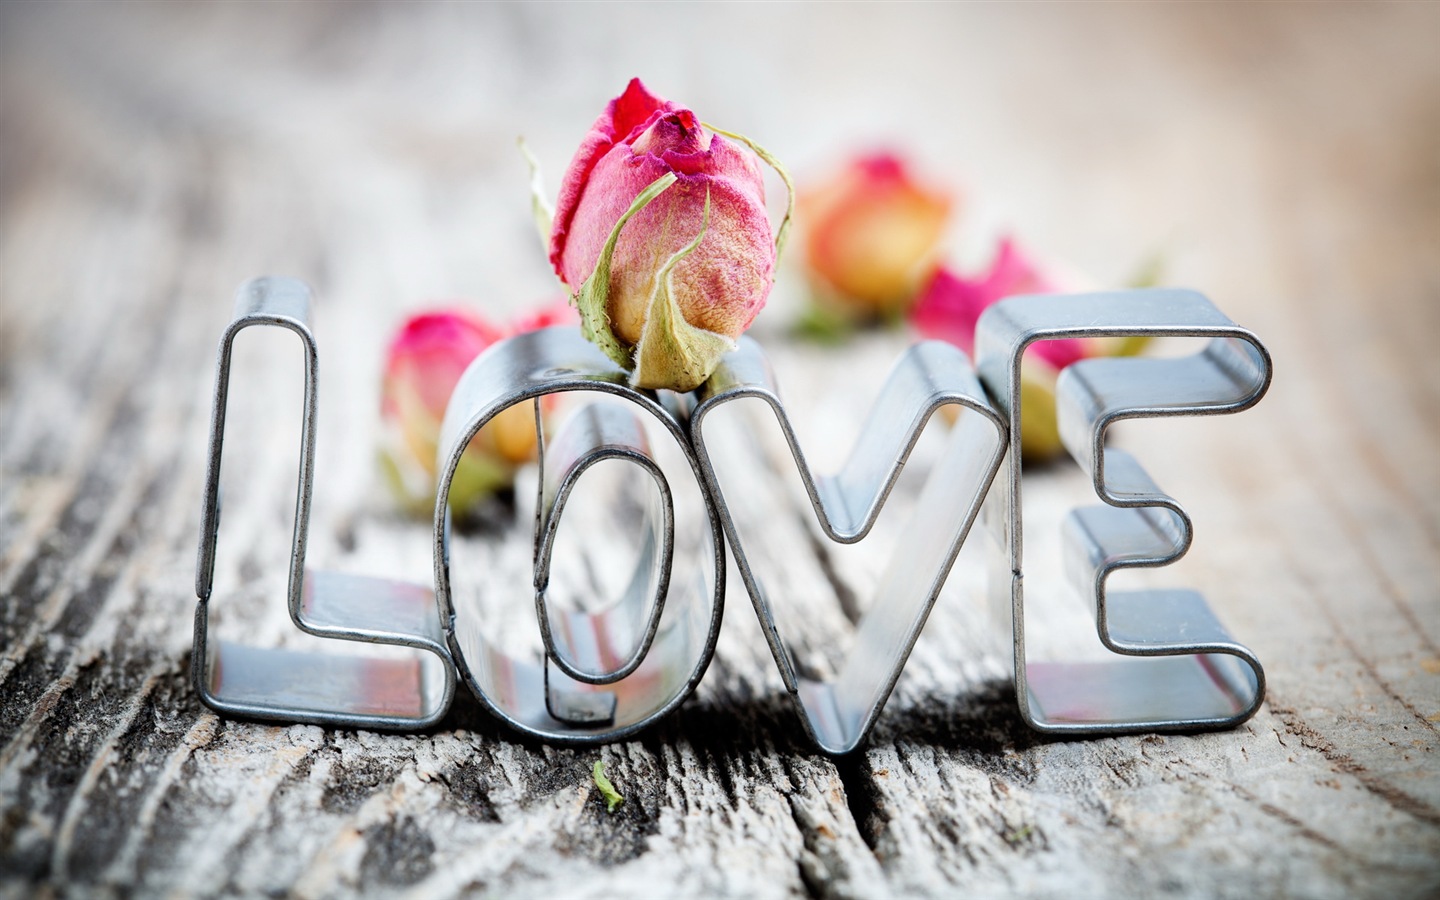 Warm and romantic Valentine's Day HD wallpapers #1 - 1440x900